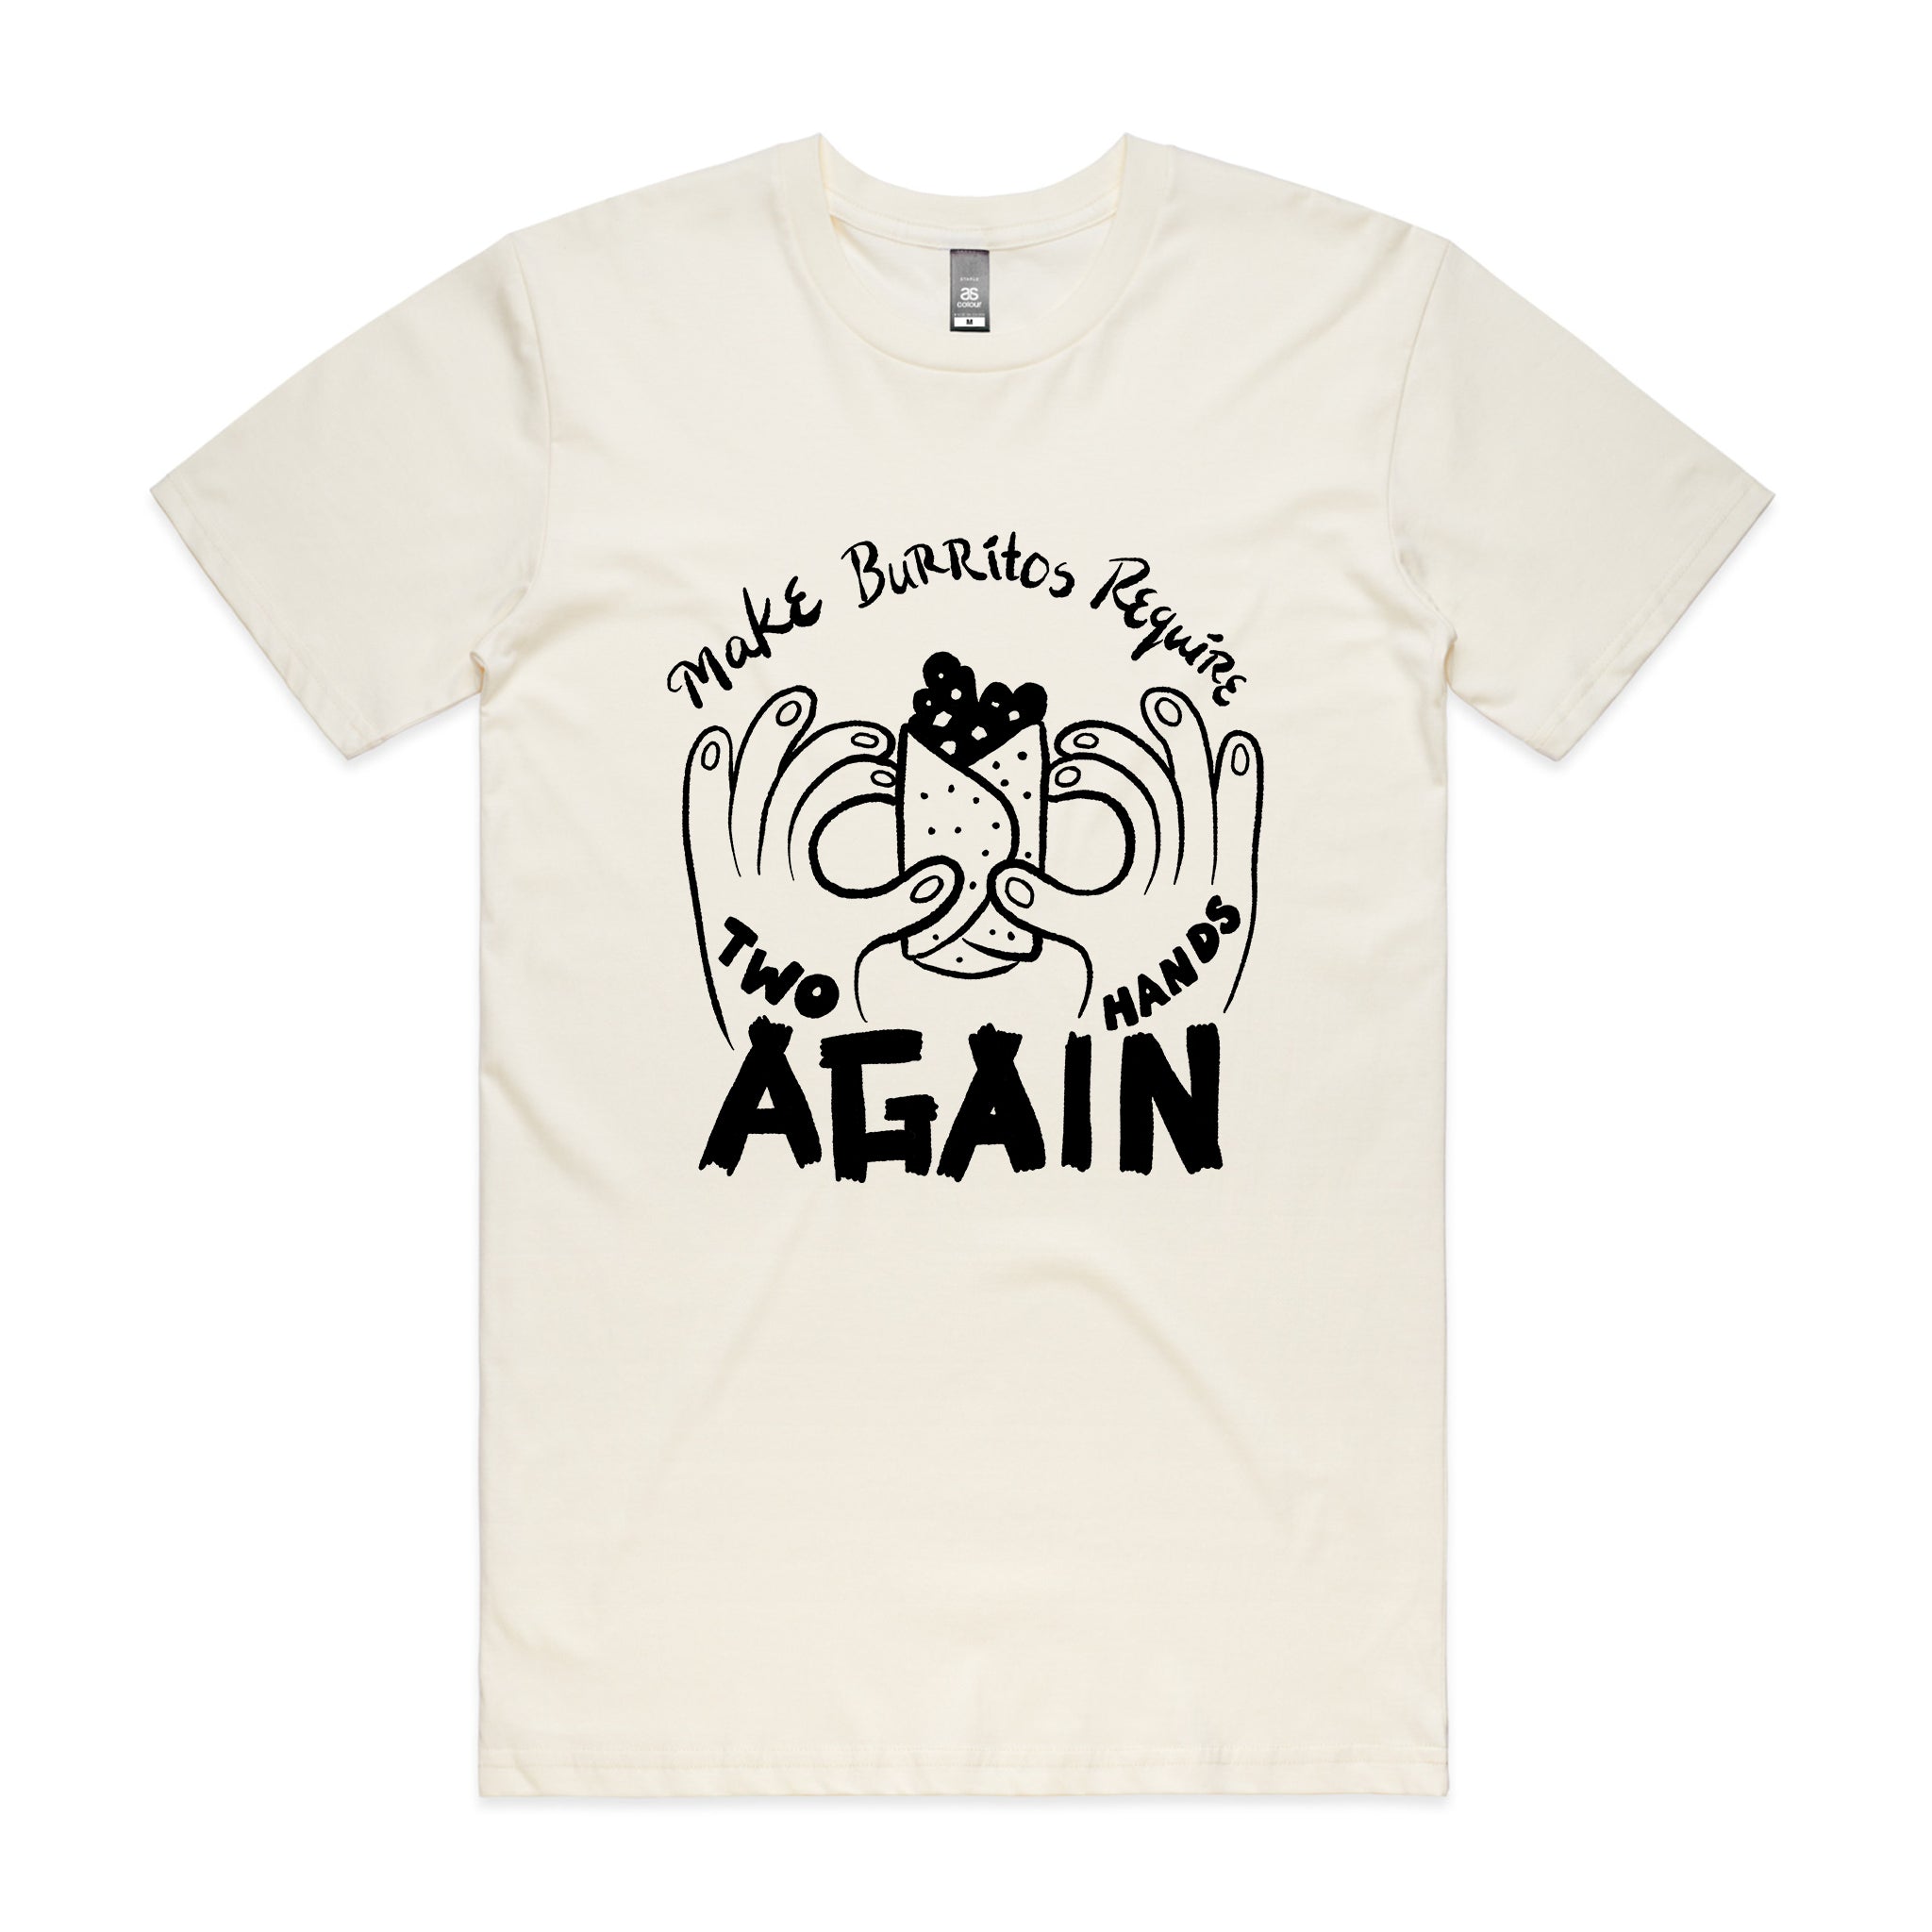 Two Hands Again Tee